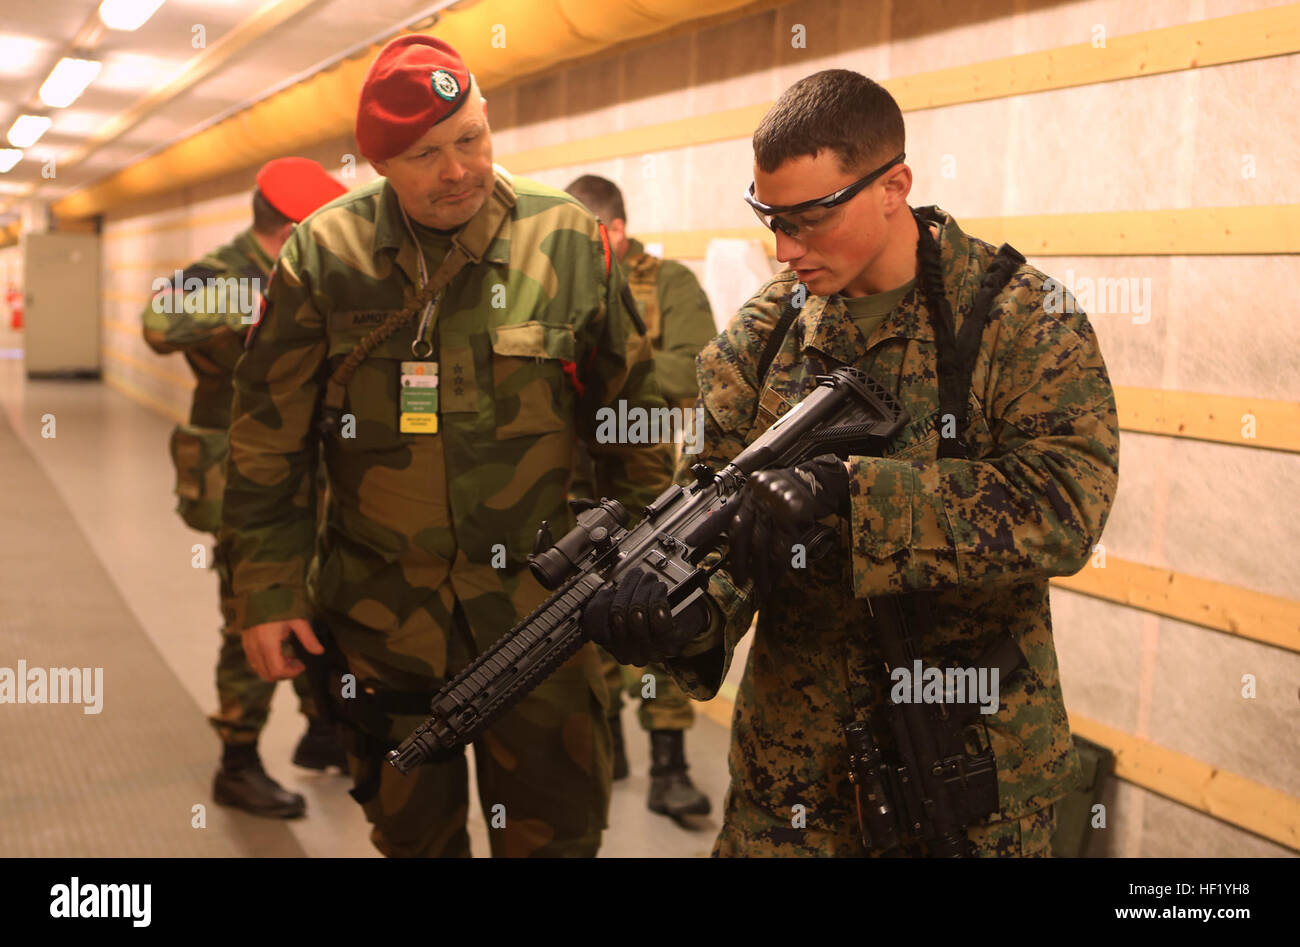 Sgt. James J. Cassidy (right), a military policeman with 2nd Supply Battalion, Combat Logistics Regiment 25, 2nd Marine Logistics Group, inspects an HK-416K assault rifle used by a Norwegian MP with Home Guard District 12 in an indoor firing range at Vaernes Garrison, Norway, Feb. 21, 2014. Two MPs attached to the battalion worked alongside their Norwegian counterparts with Home Guard District 12 to build stronger binds between the two nations' military forces. Cold Response 2014 is a Norwegian-led multinational exercise above the Arctic Circle designed prepare for crisis response operations.  Stock Photo